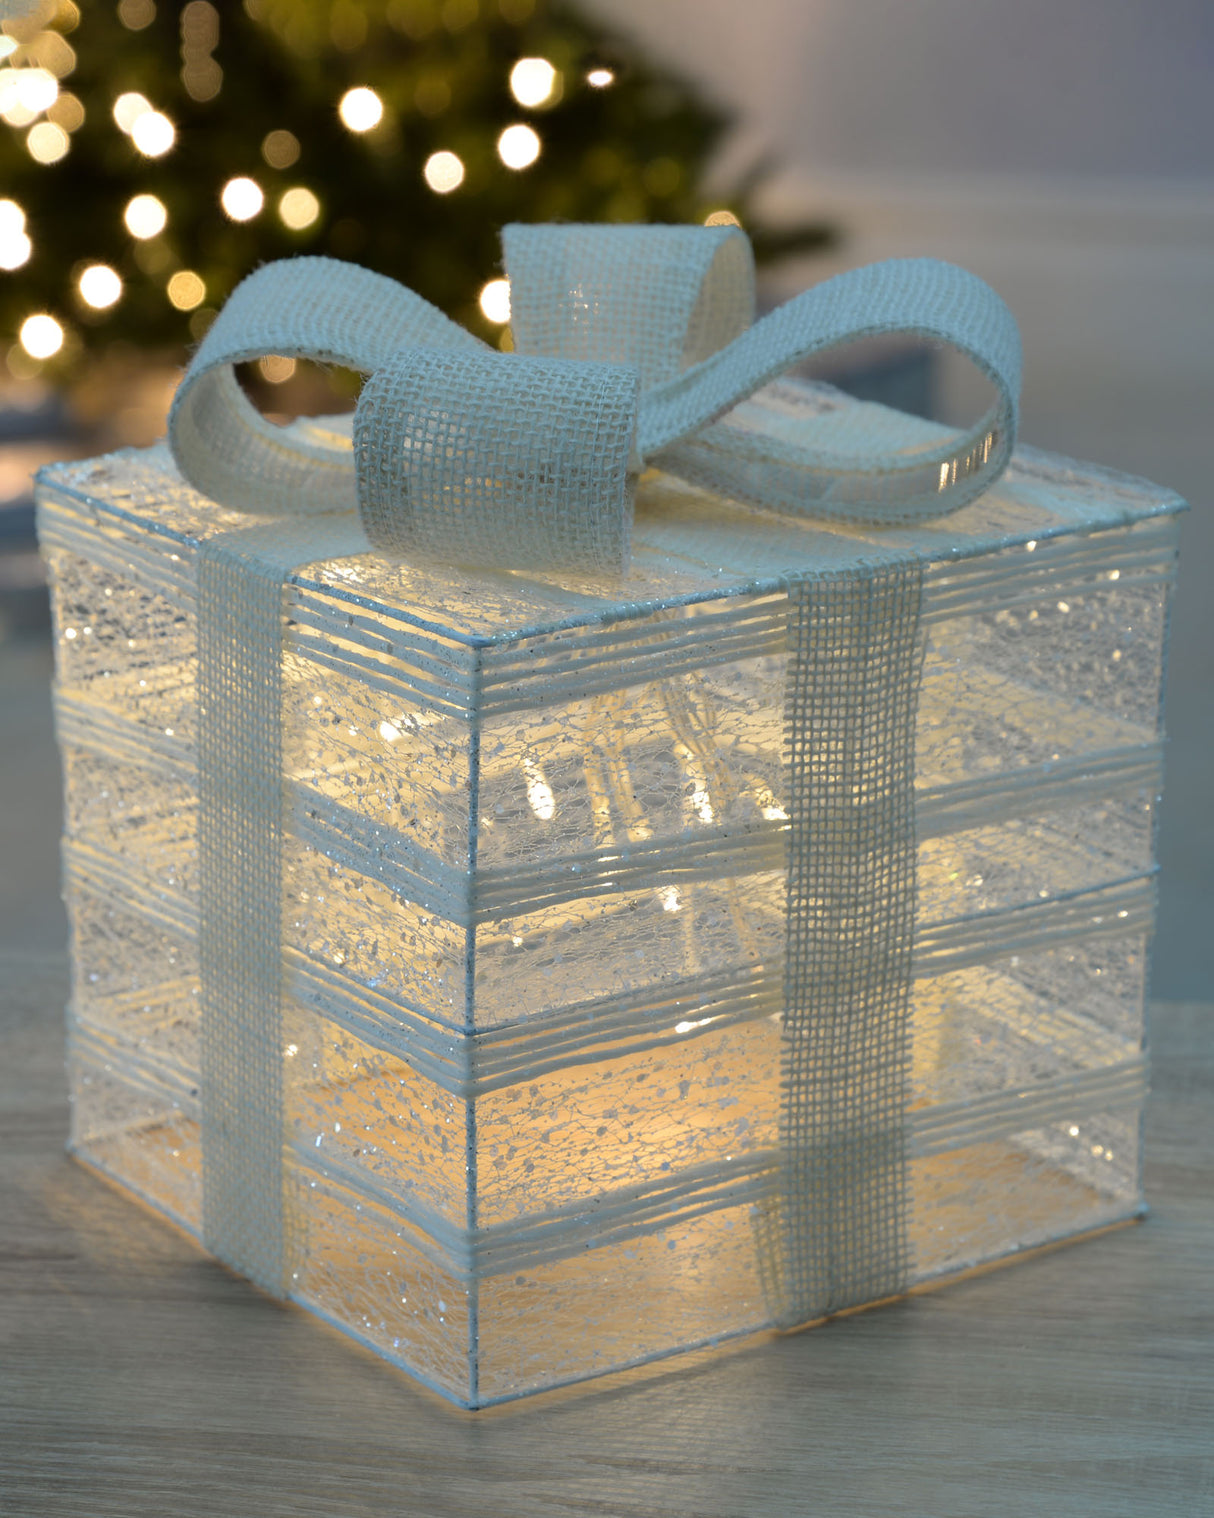 Pre-Lit Paper String and Gauze Gift Box, 20 cm